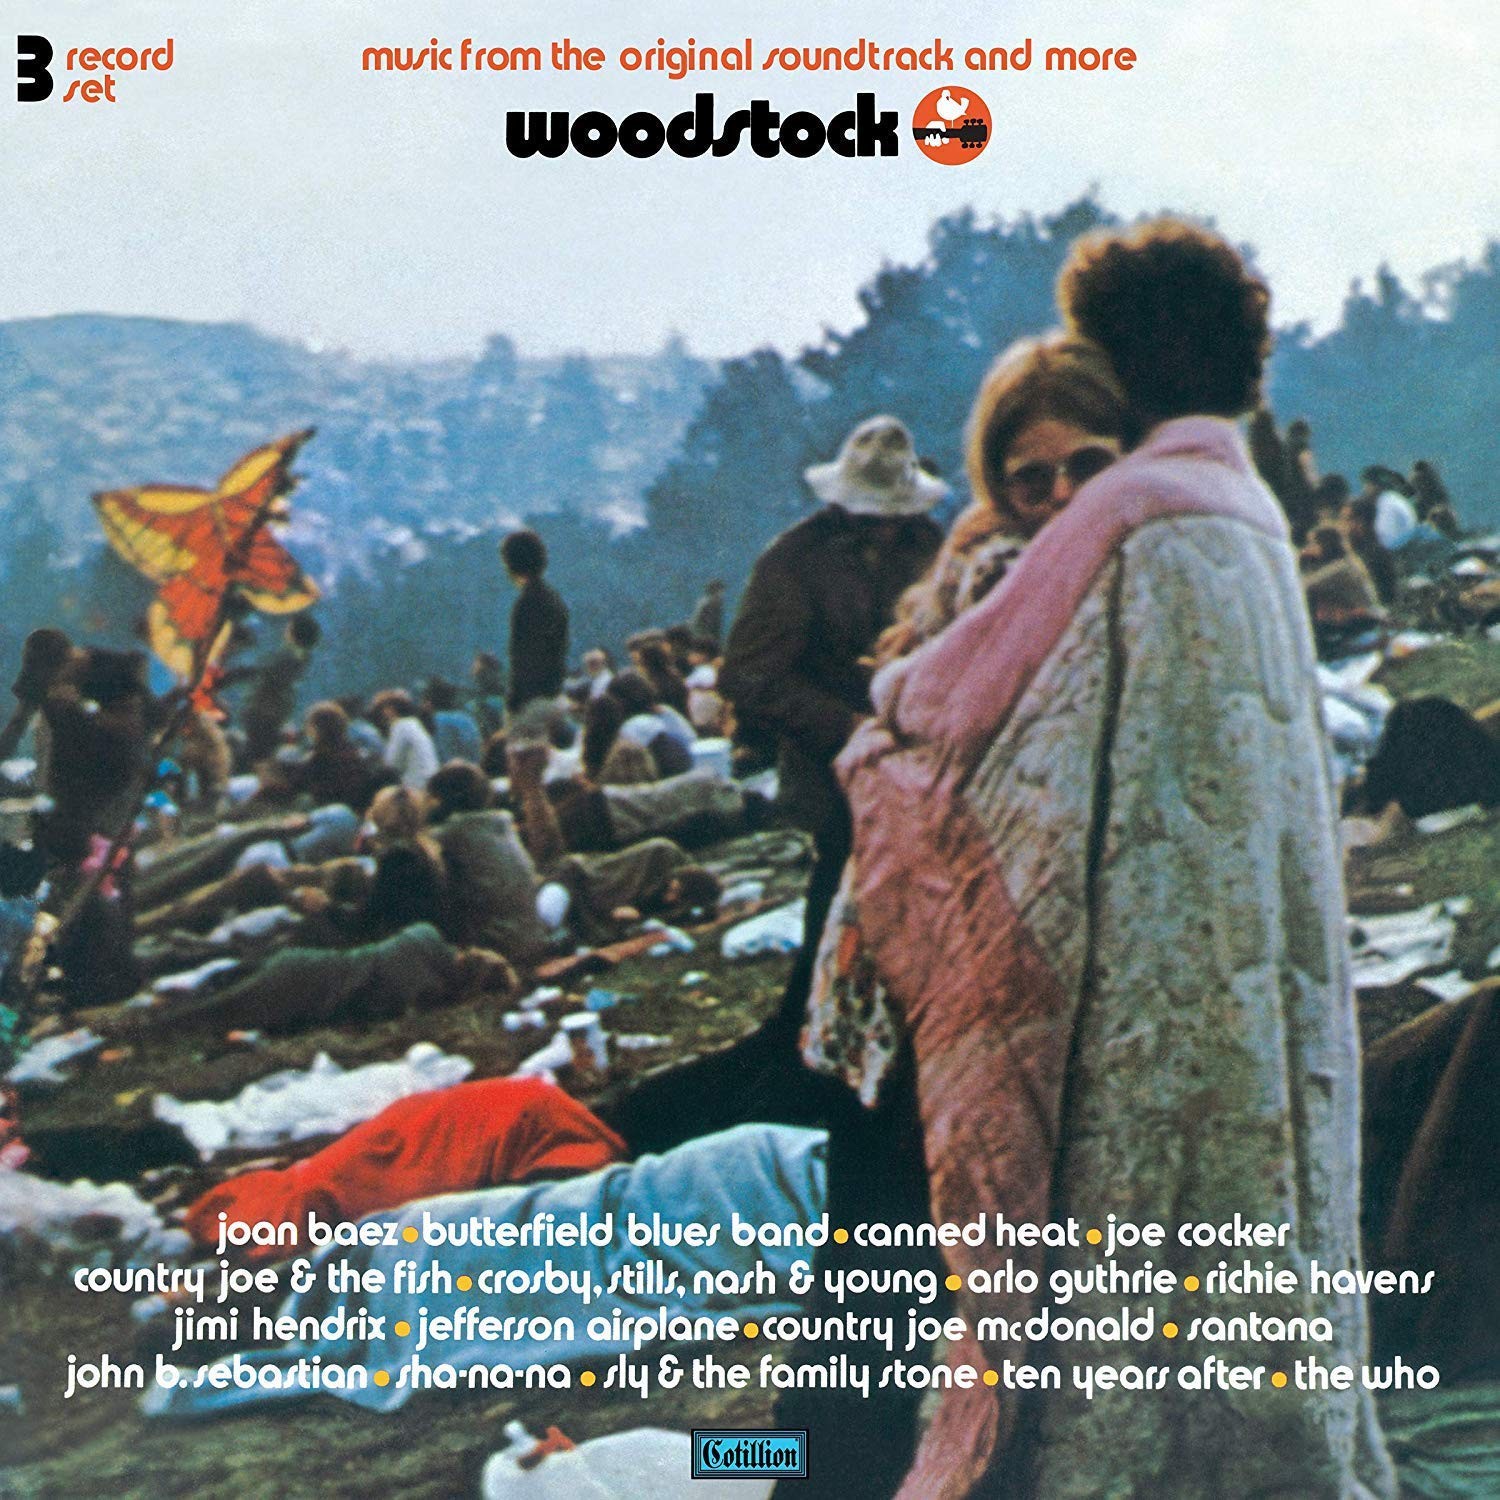 Woodstock - Music from the original soundtrack (3-LP)